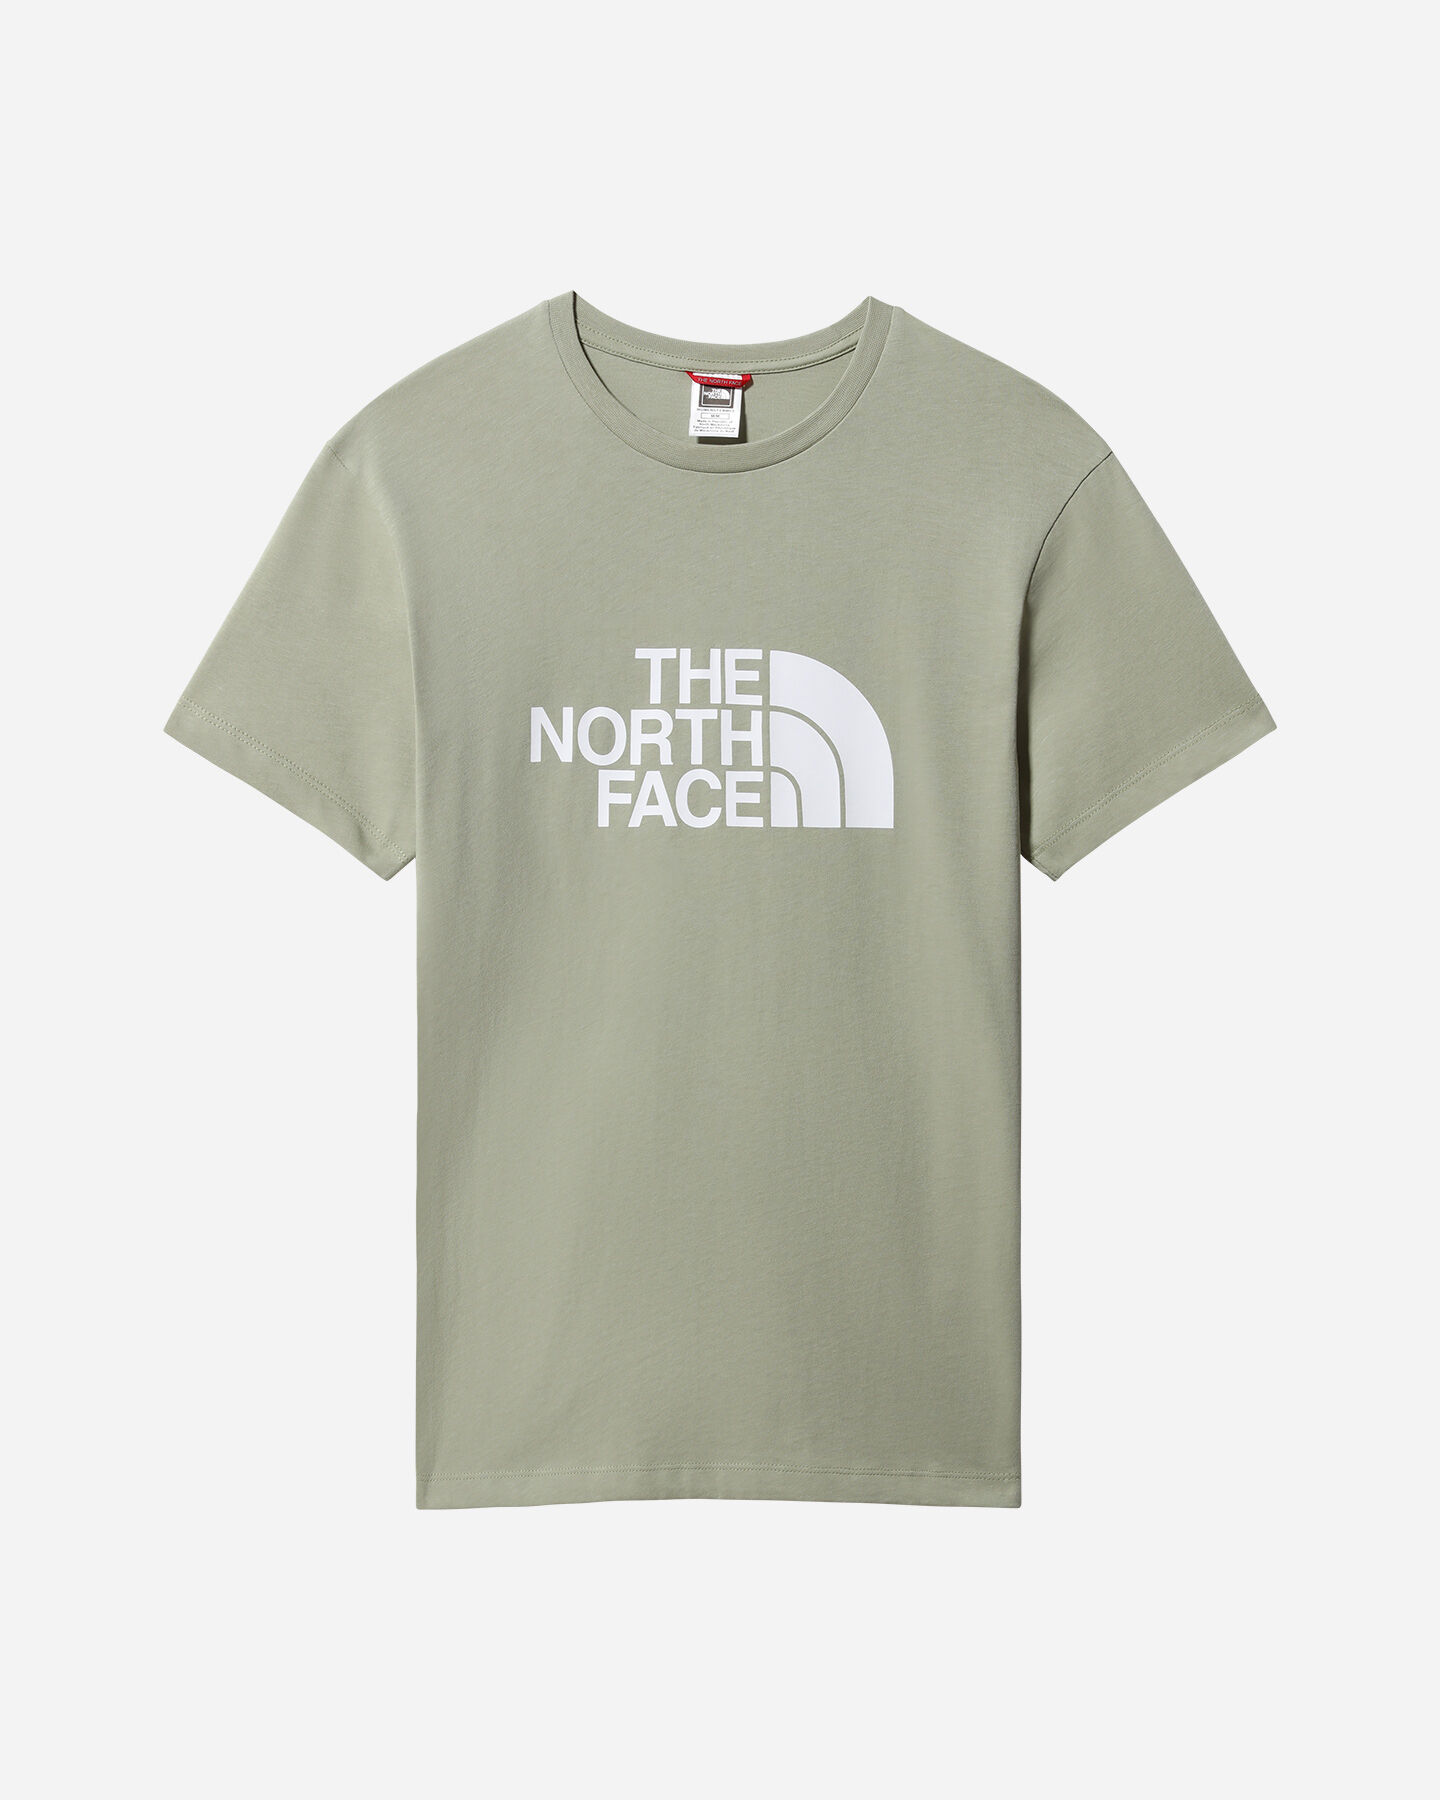  T-Shirt THE NORTH FACE EASY W S5422393|3X3|XS scatto 0